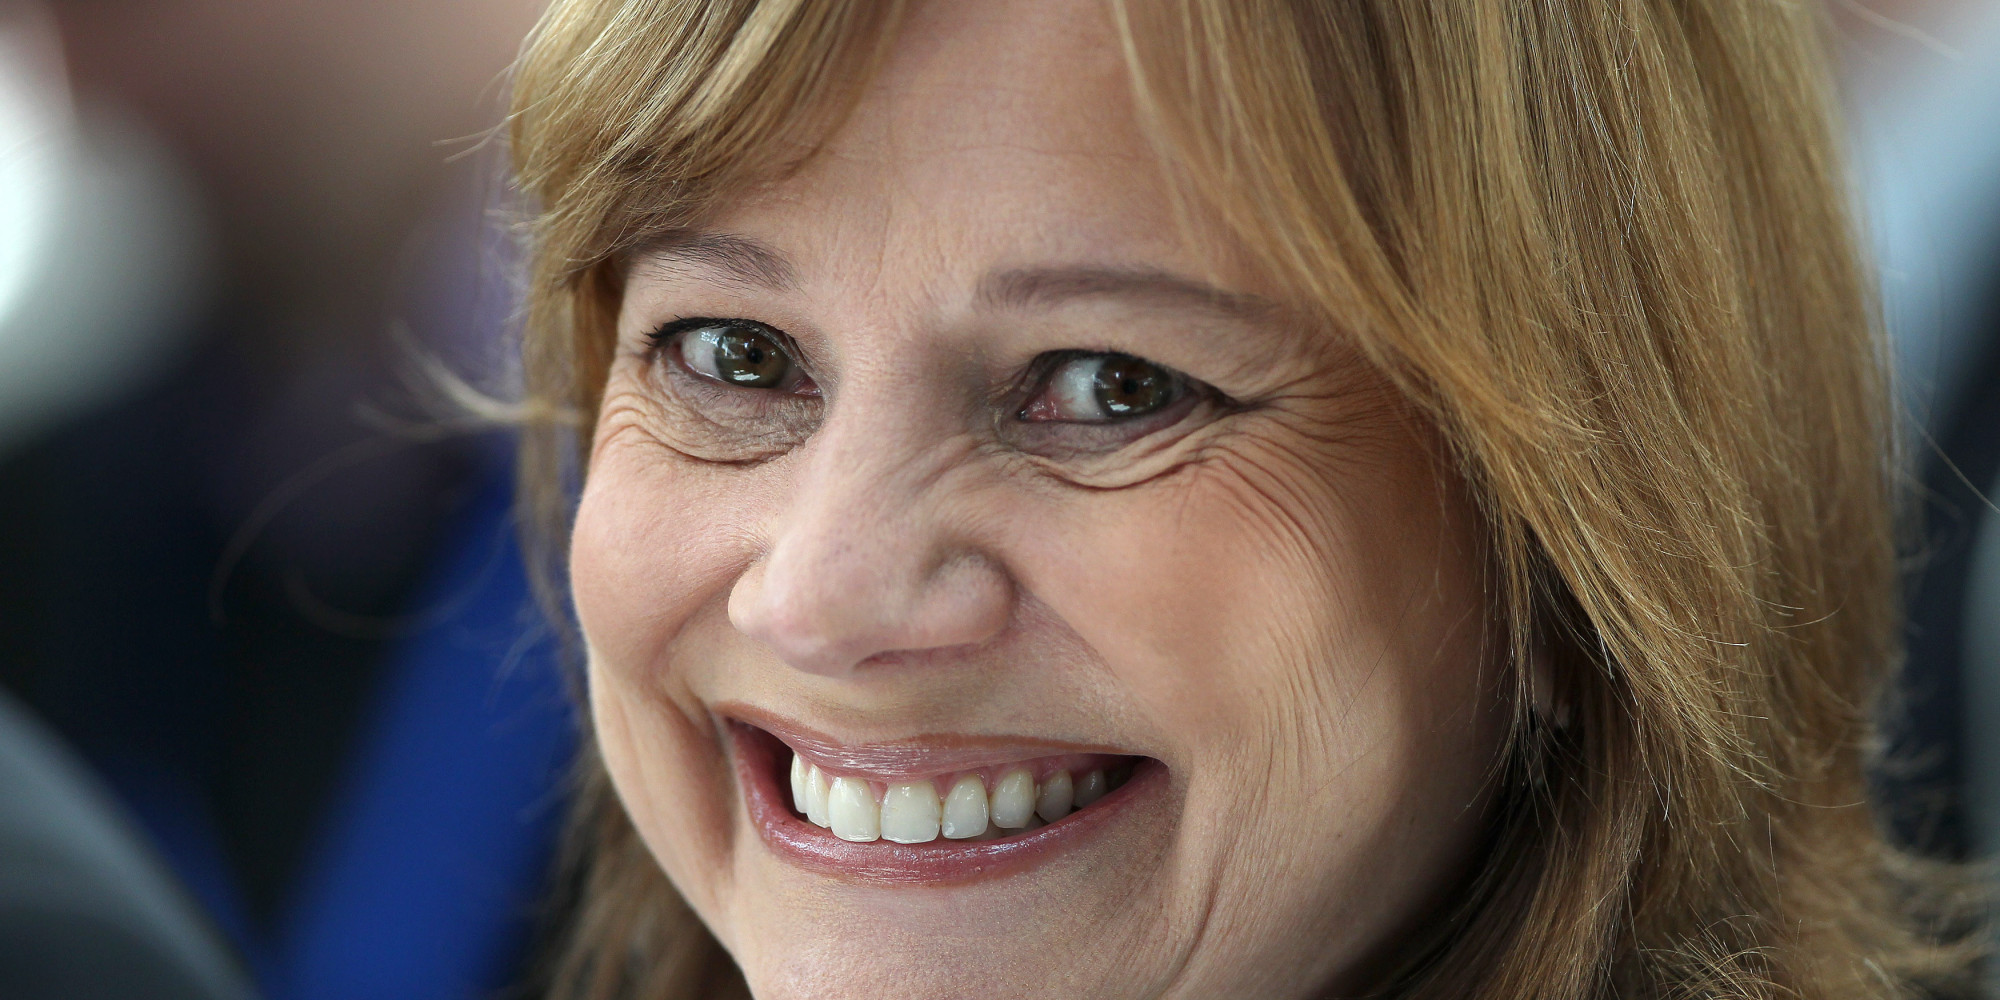 Mary Barra, GM's First Female CEO, Will Earn $14.4 Million In 2014